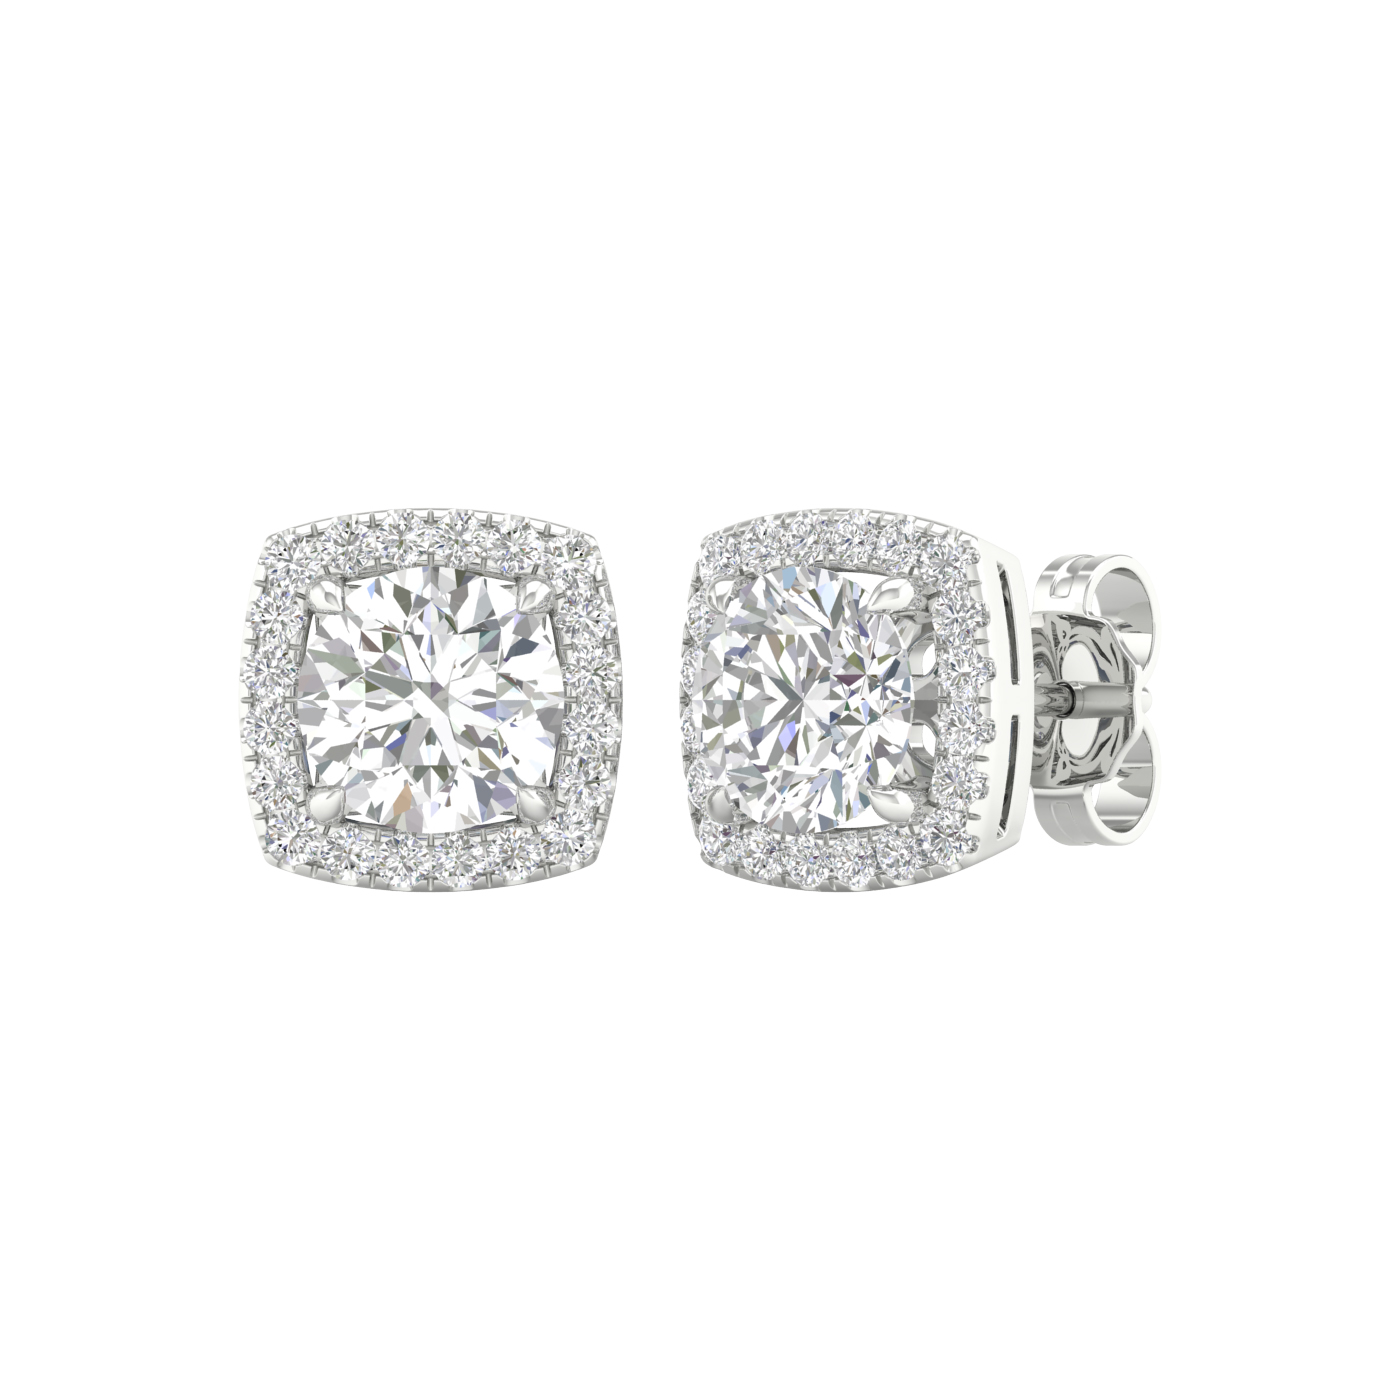 2.25ct. Diamond Halo Earring (Cushion Shape With Round Centre )